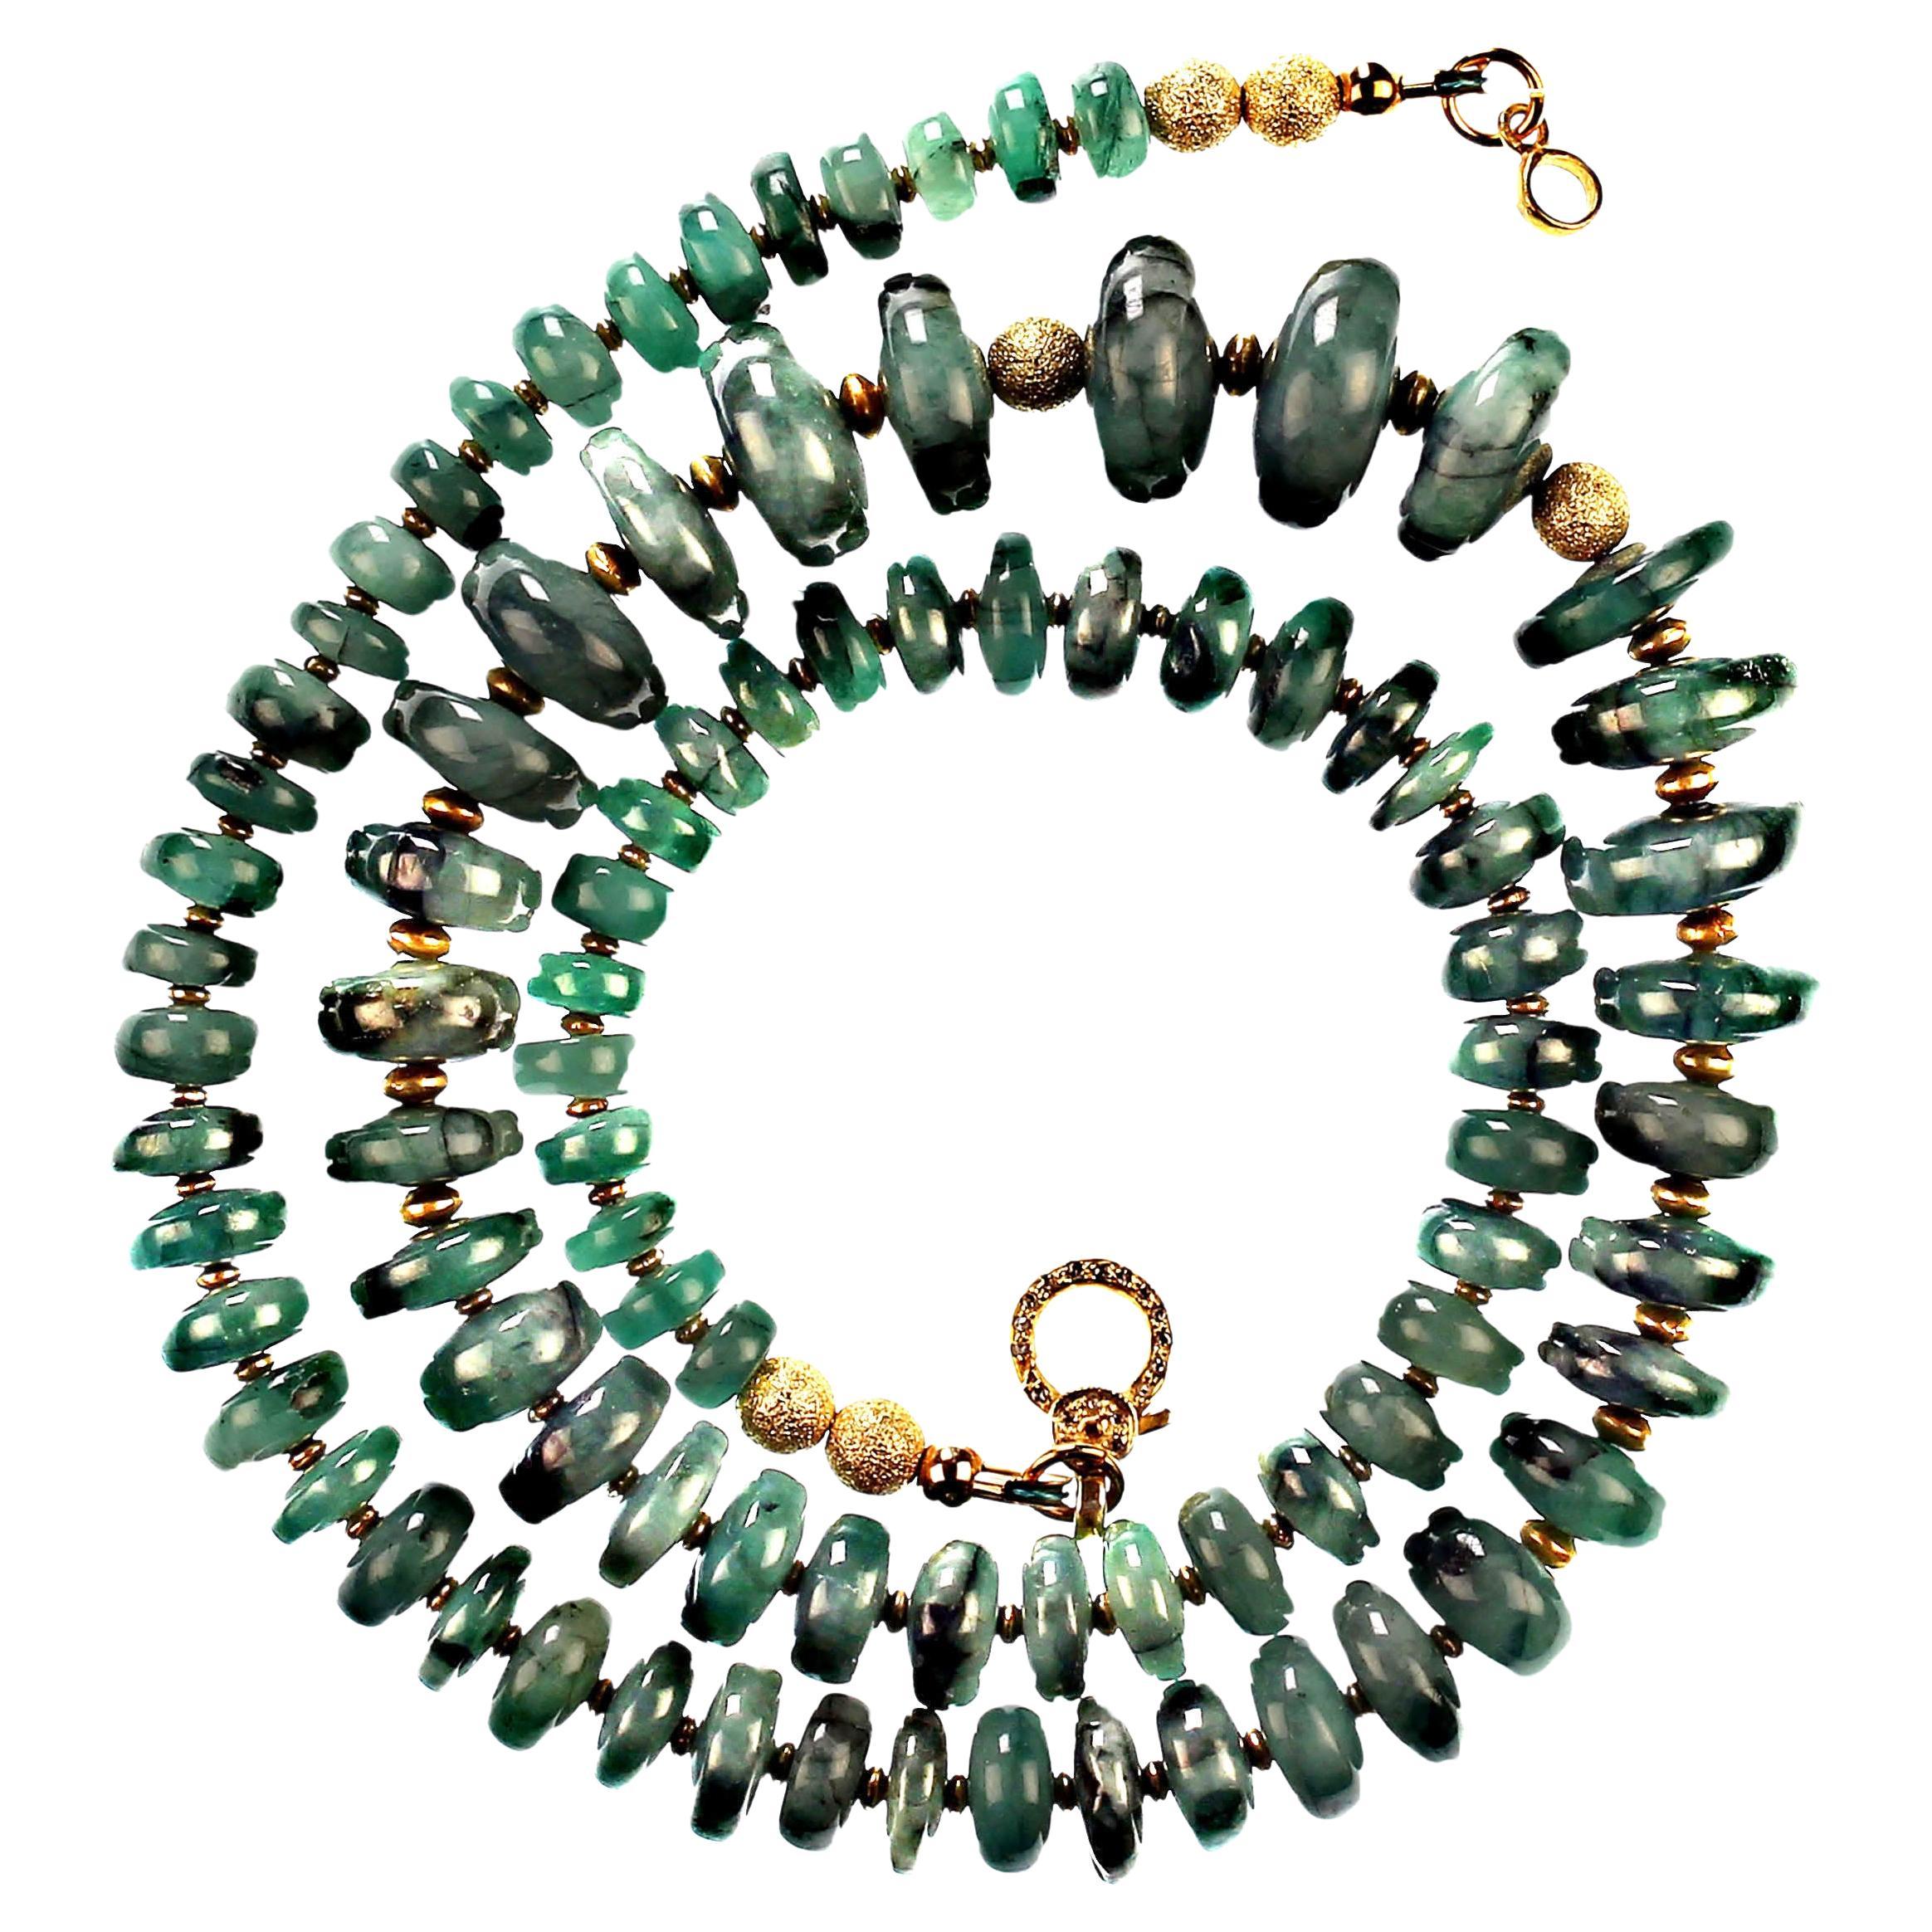 23 Inch necklace of highly polished Emerald matrix graduated rondelles.  These lovely Emerald rondelles are accented with rondelles of gold 22K plate over copper and finished with a vermeil and diamond studded lobster claw clasp.  Green is the